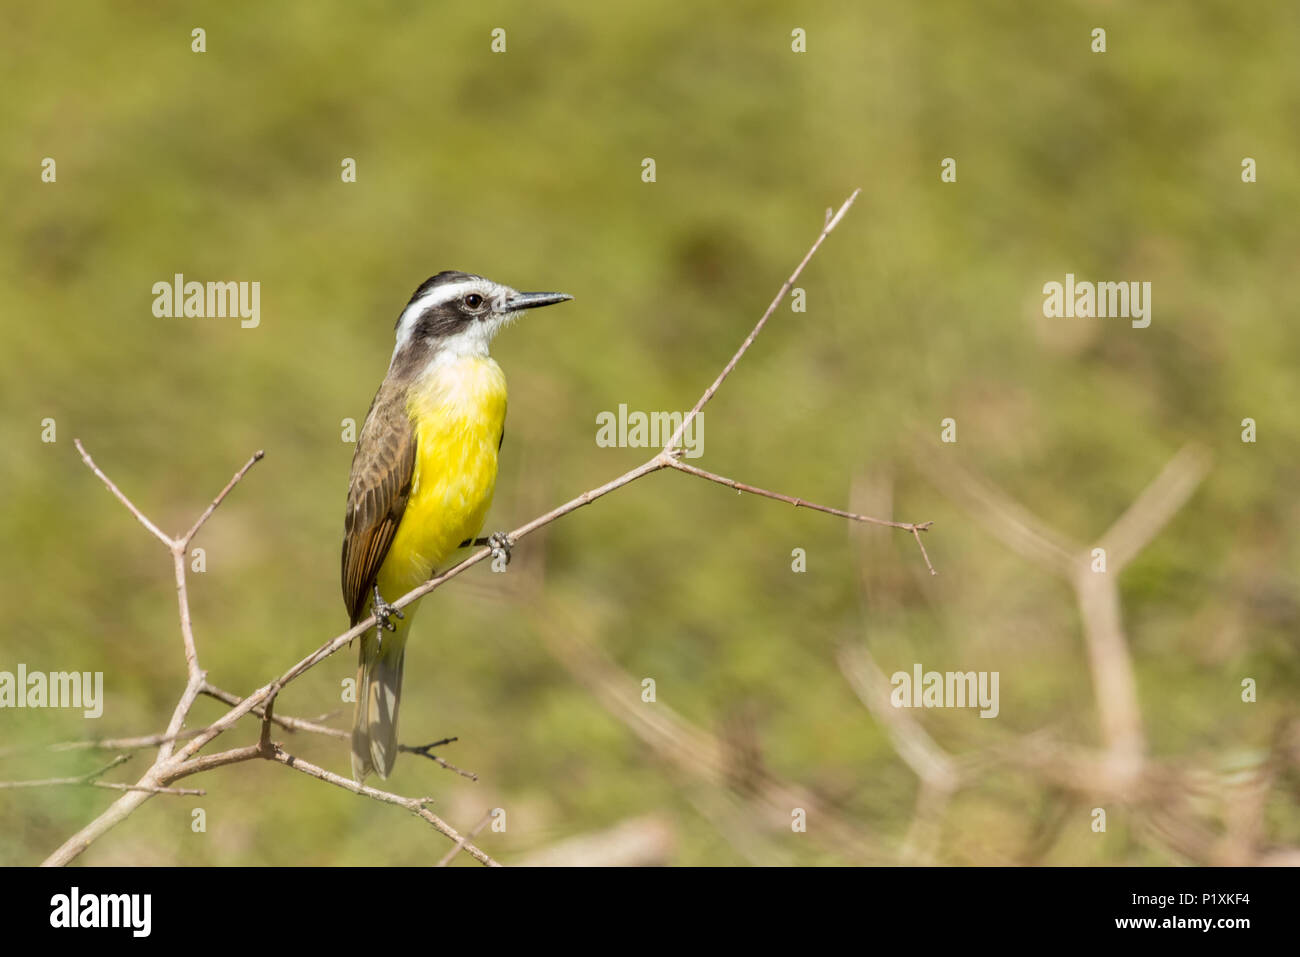 Lesser Kiskadee perched in a low shrub in the Pantanal region of Brazil, Mato Grosso, South America Stock Photo